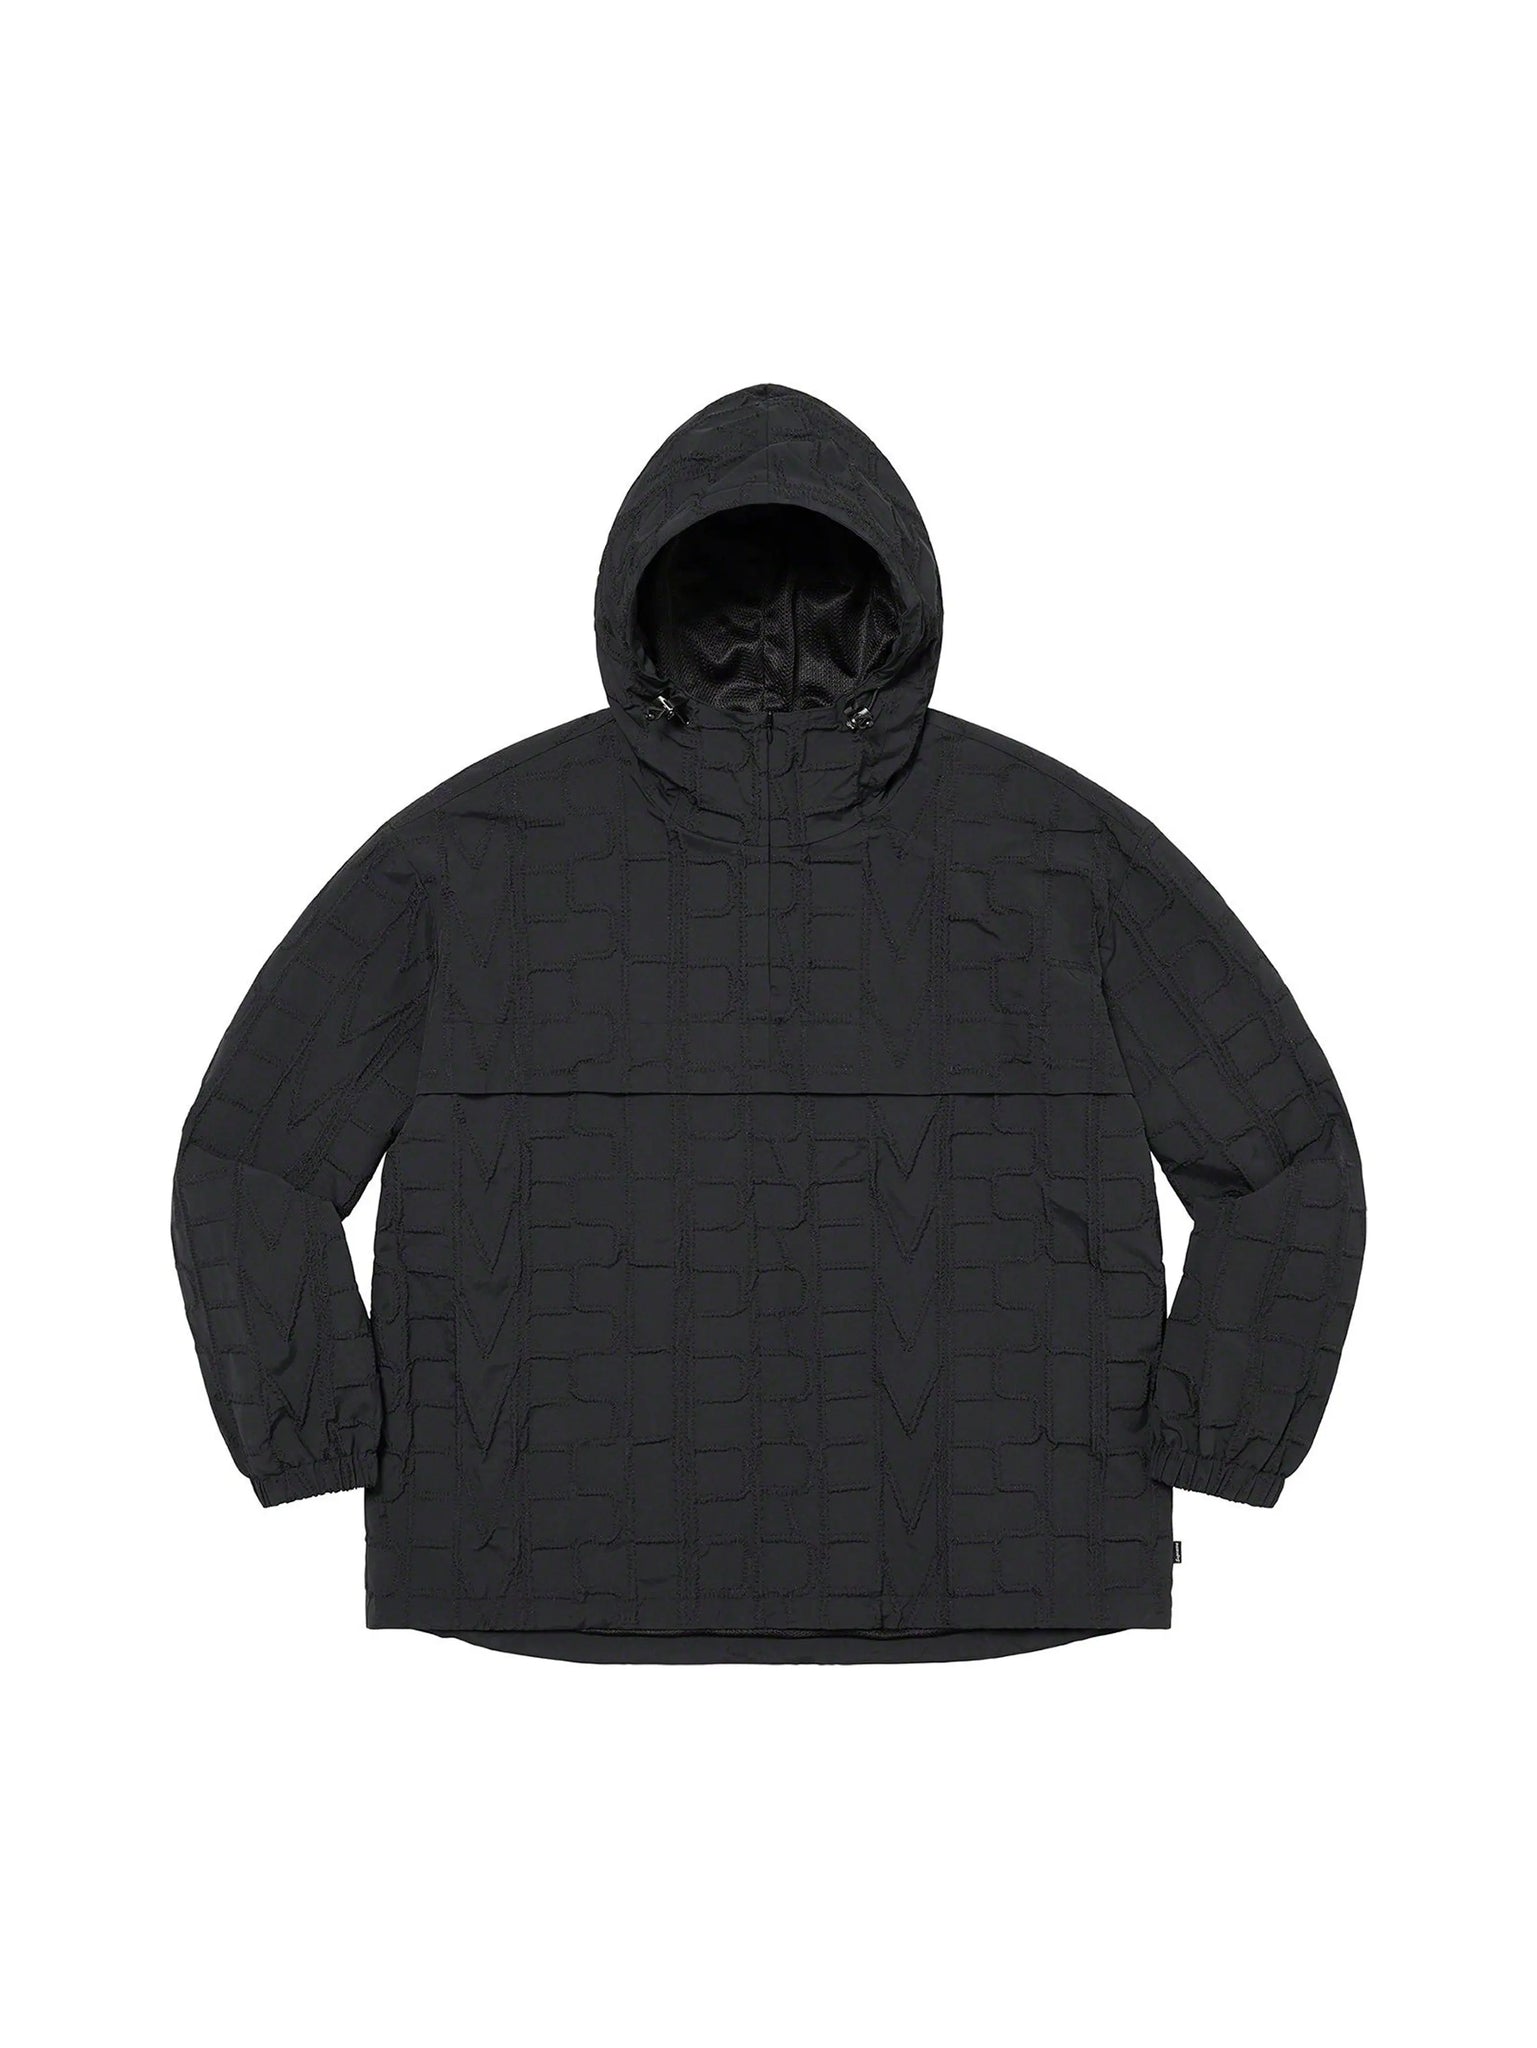 Supreme Repeat Stitch Anorak Black in Auckland, New Zealand - Shop name